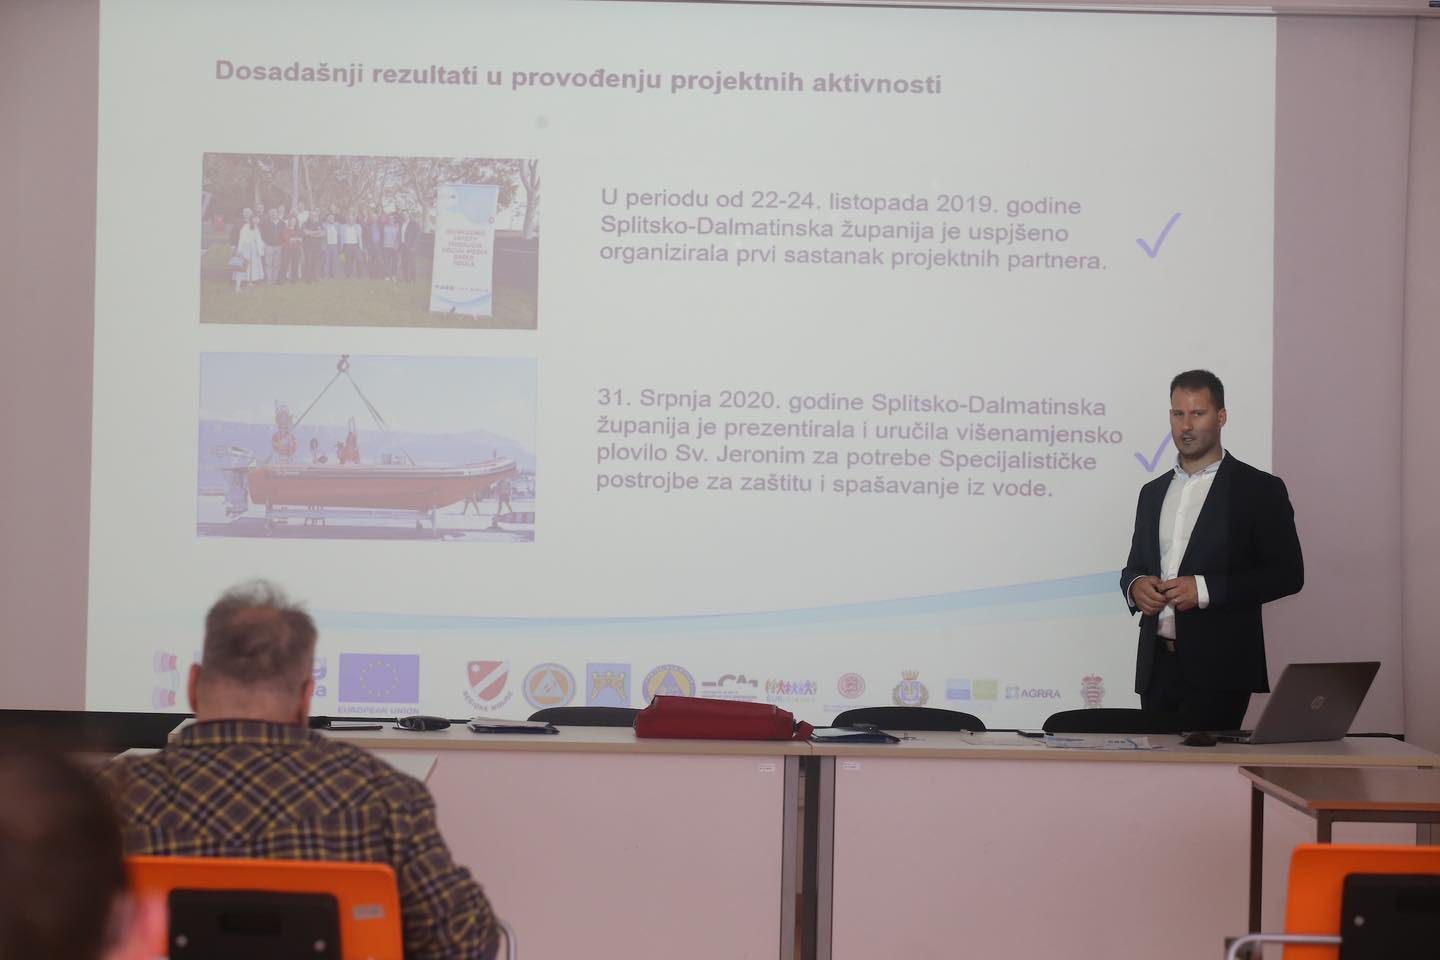 The Info Day of the project was held at the University of Split on 12 May 2022